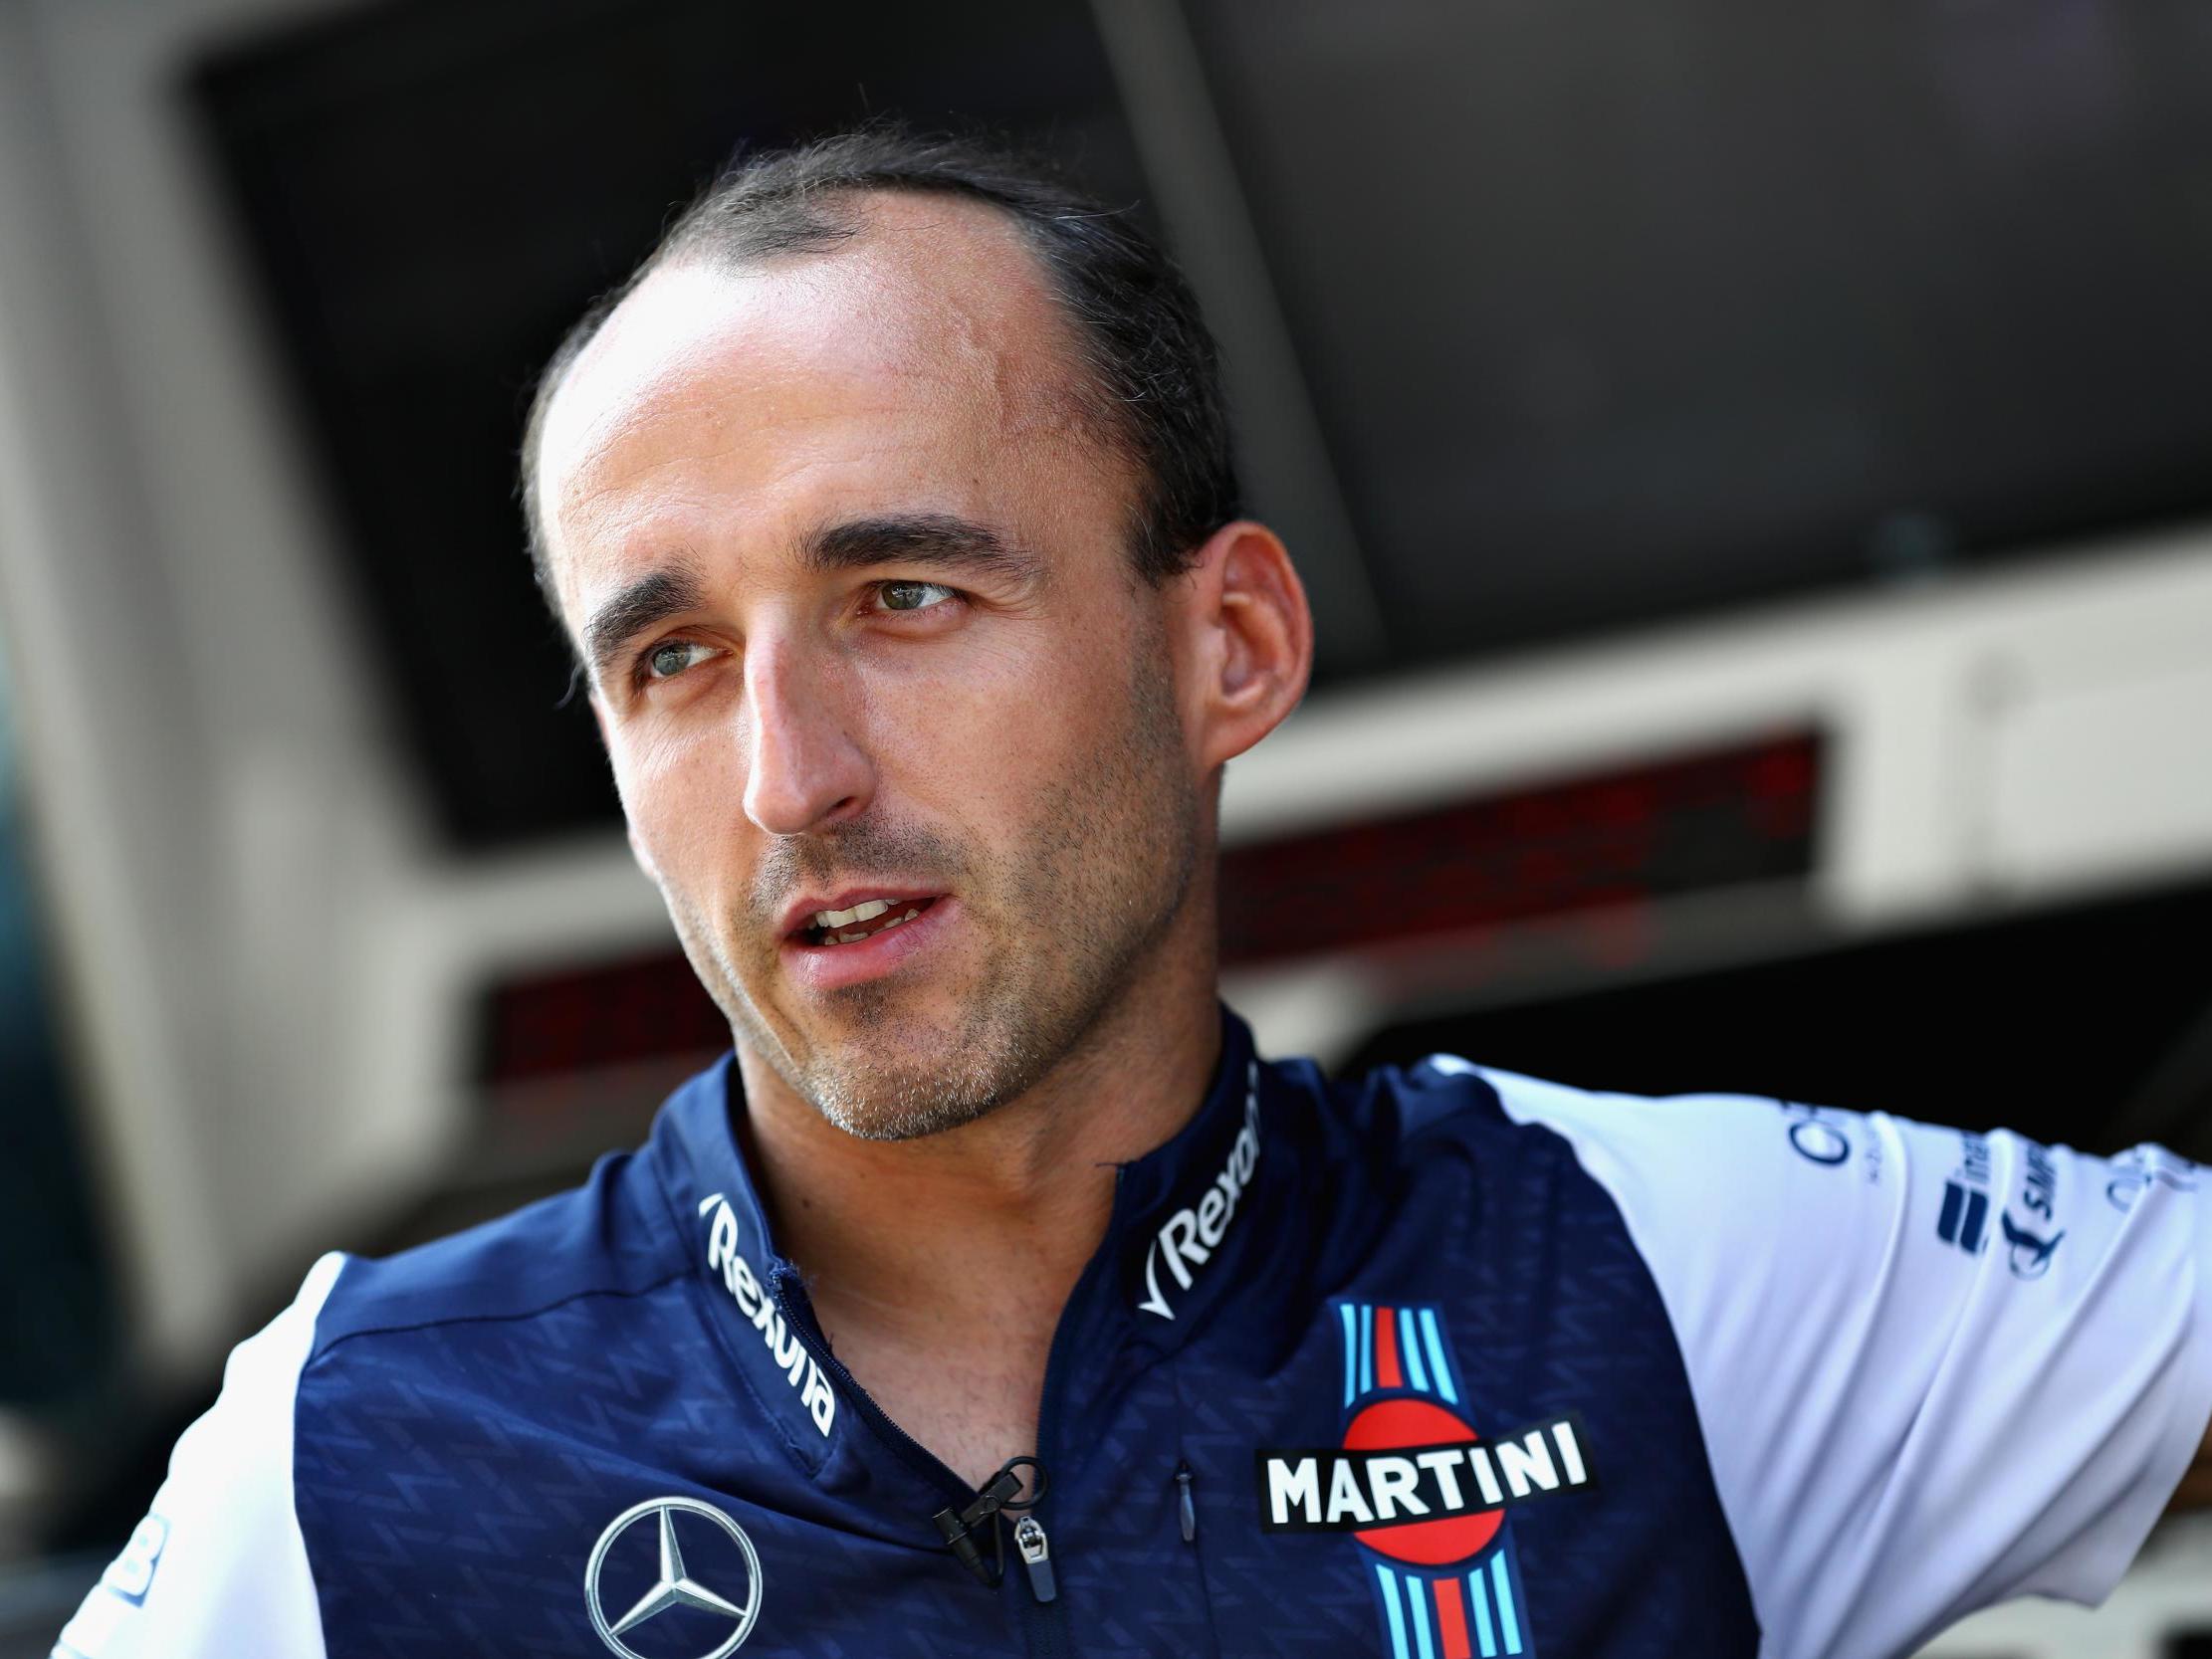 robert-kubica-returns-to-f1-with-williams-for-2019-eight-years-after